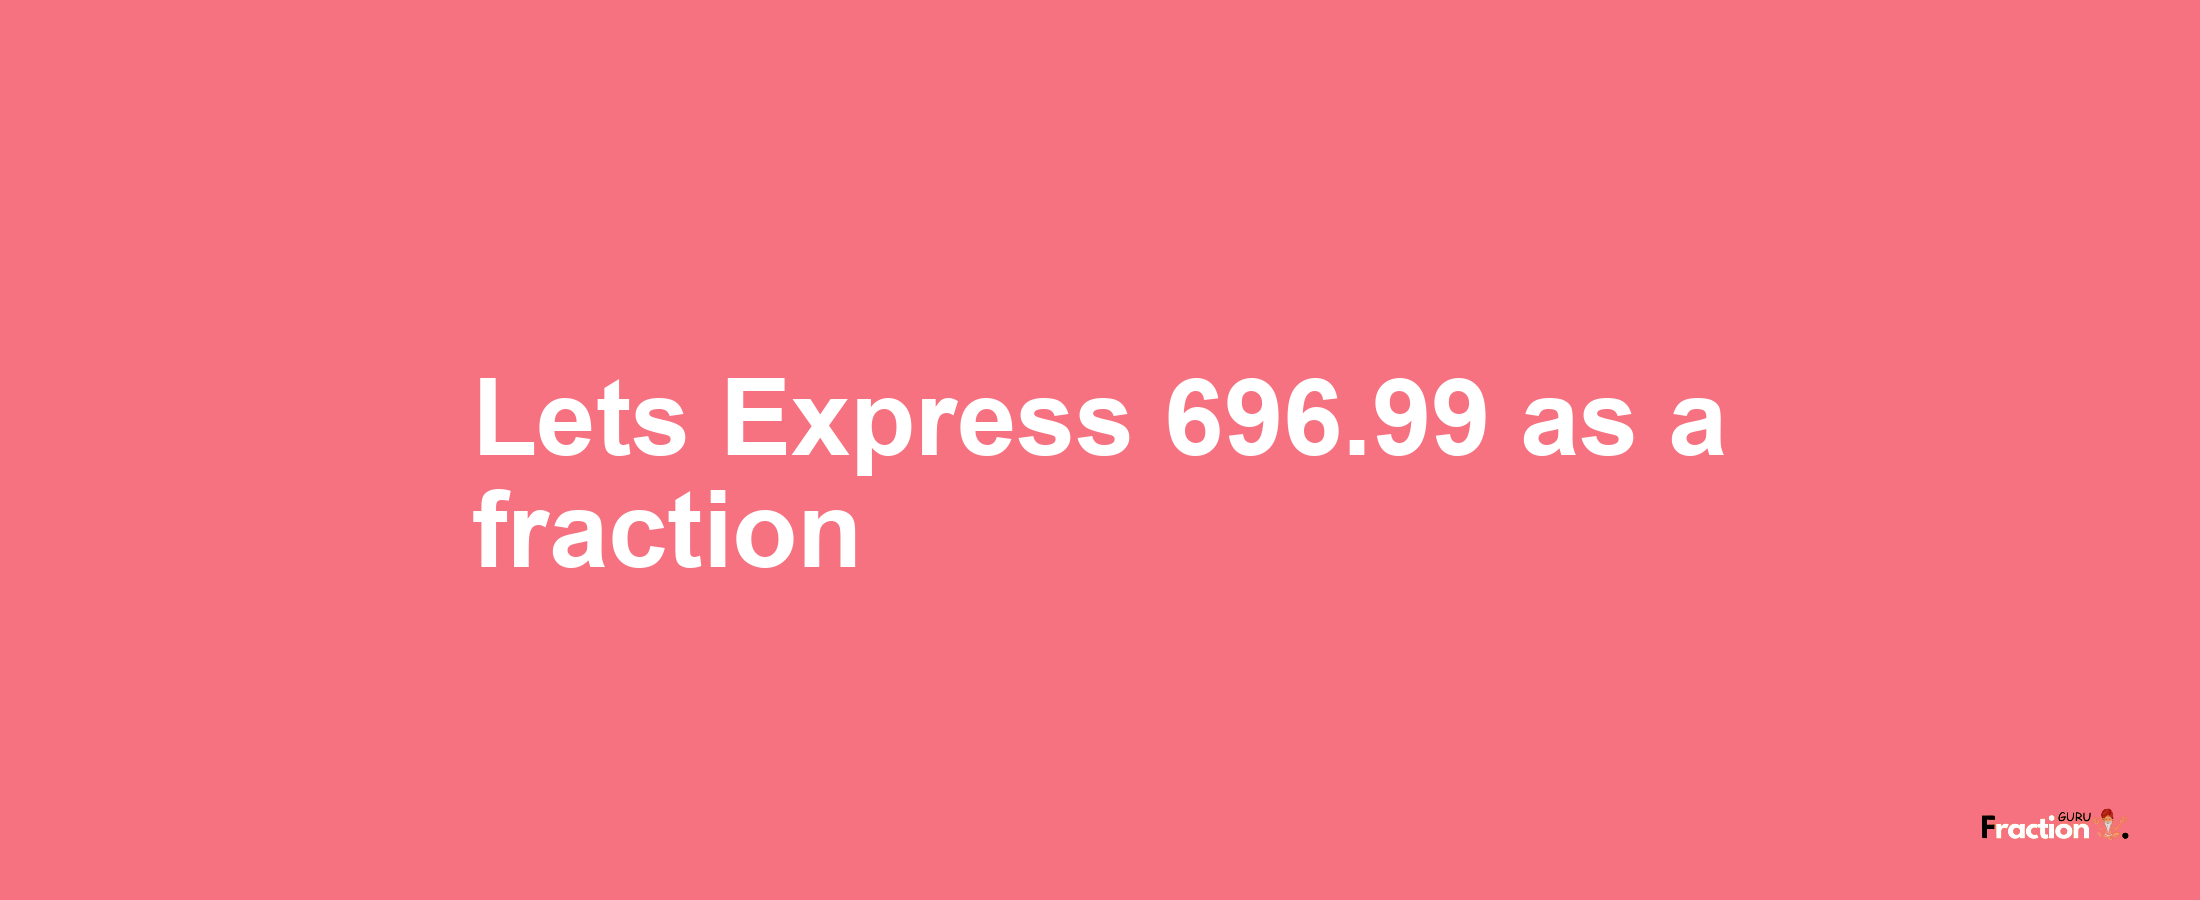 Lets Express 696.99 as afraction